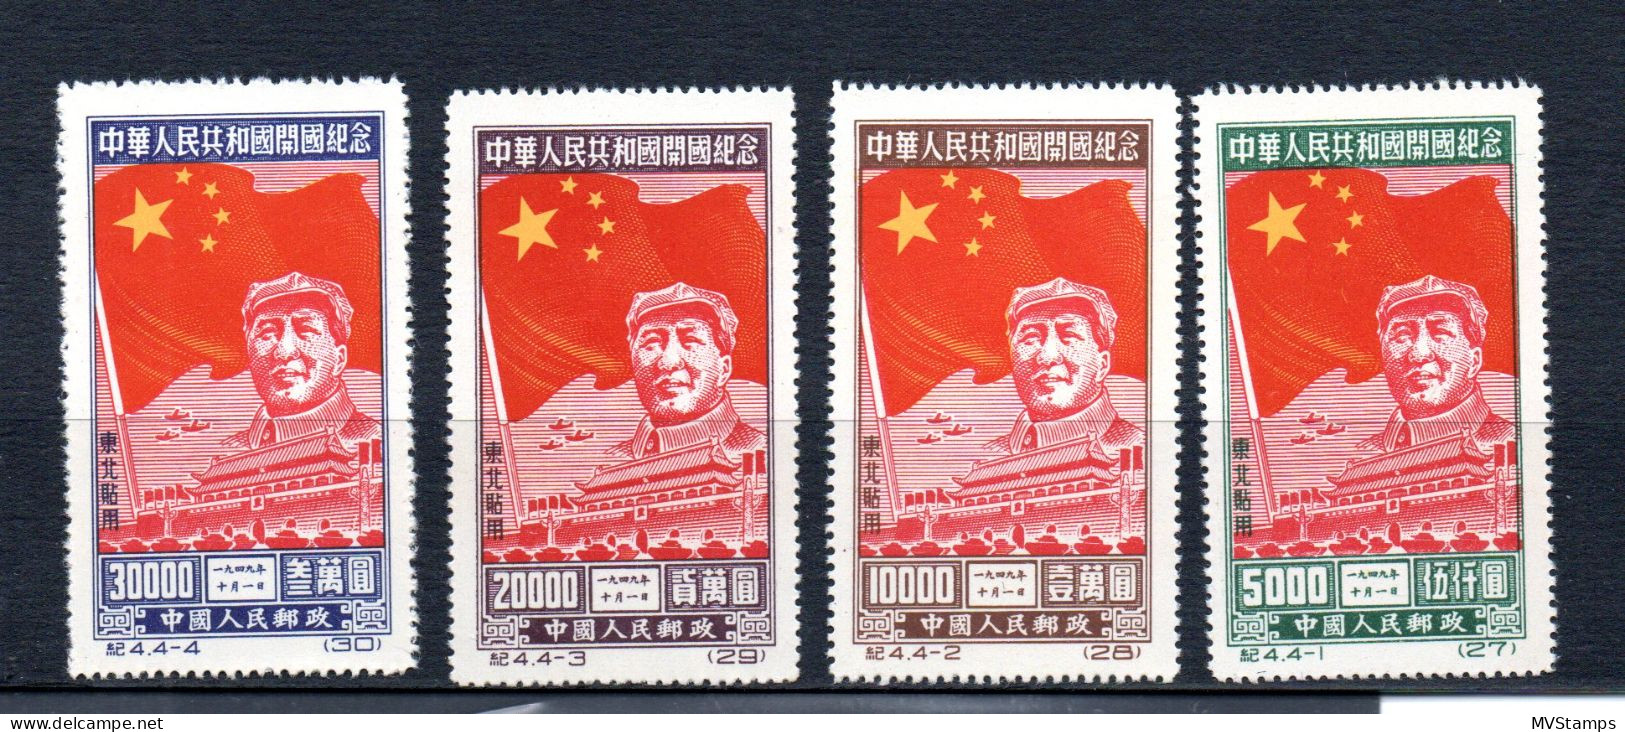 North East China 1950 Sc 150/53 (Michel 172/75) Mao Nice MNH - North-Eastern 1946-48